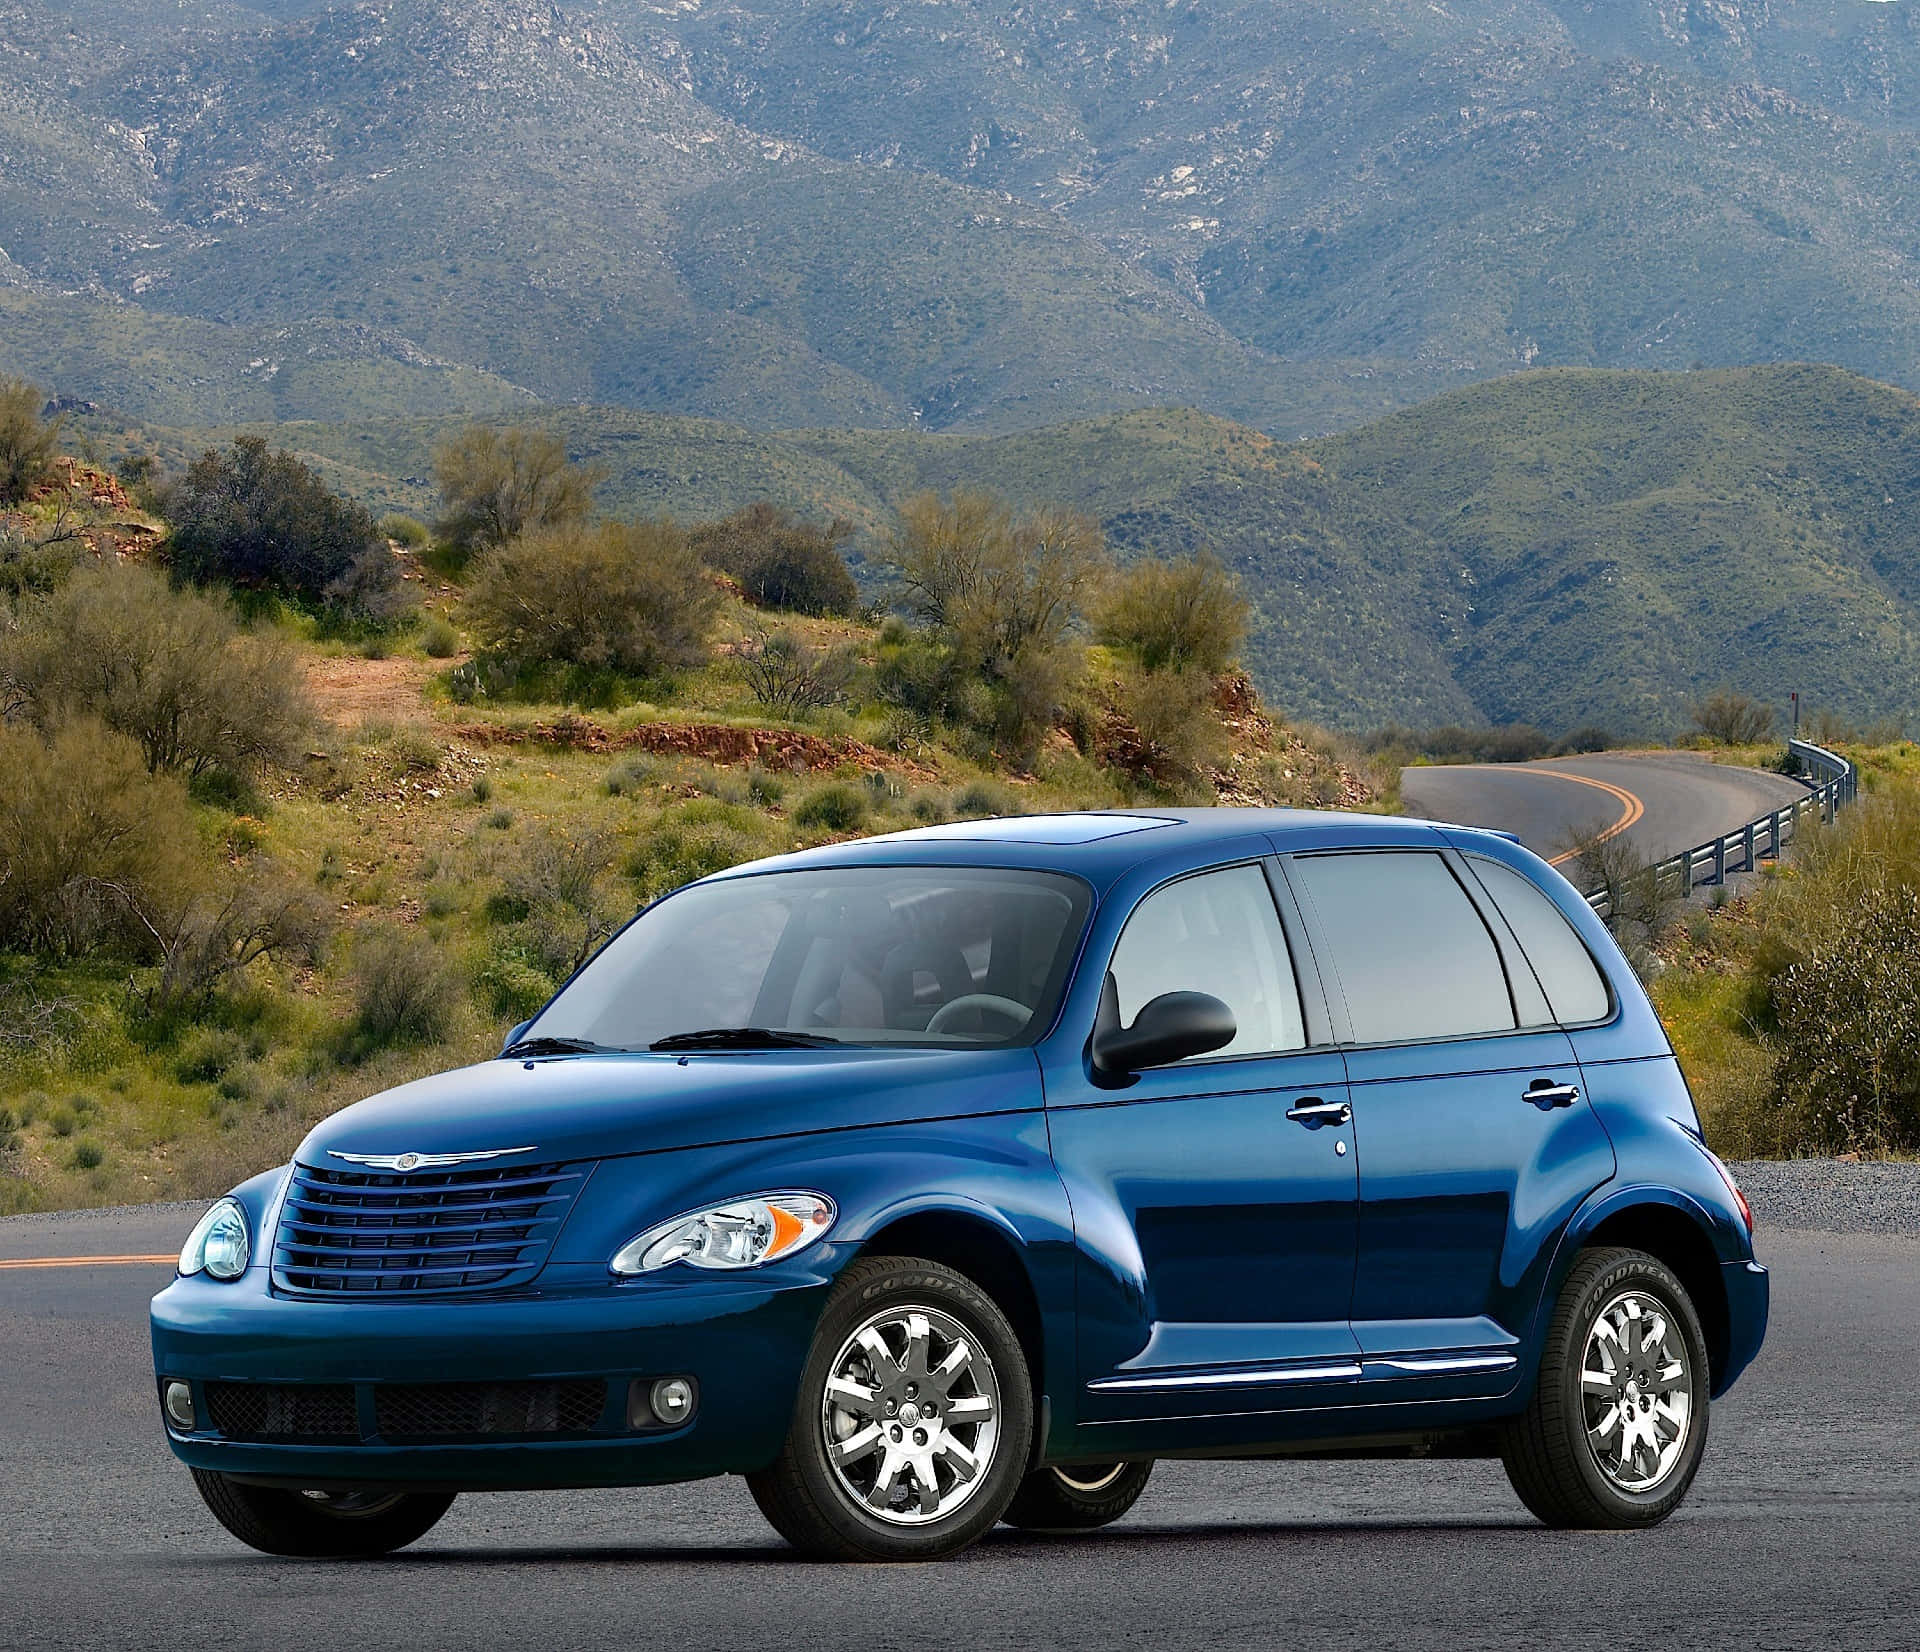 Chrysler PT Cruiser Parked in Picturesque Location Wallpaper